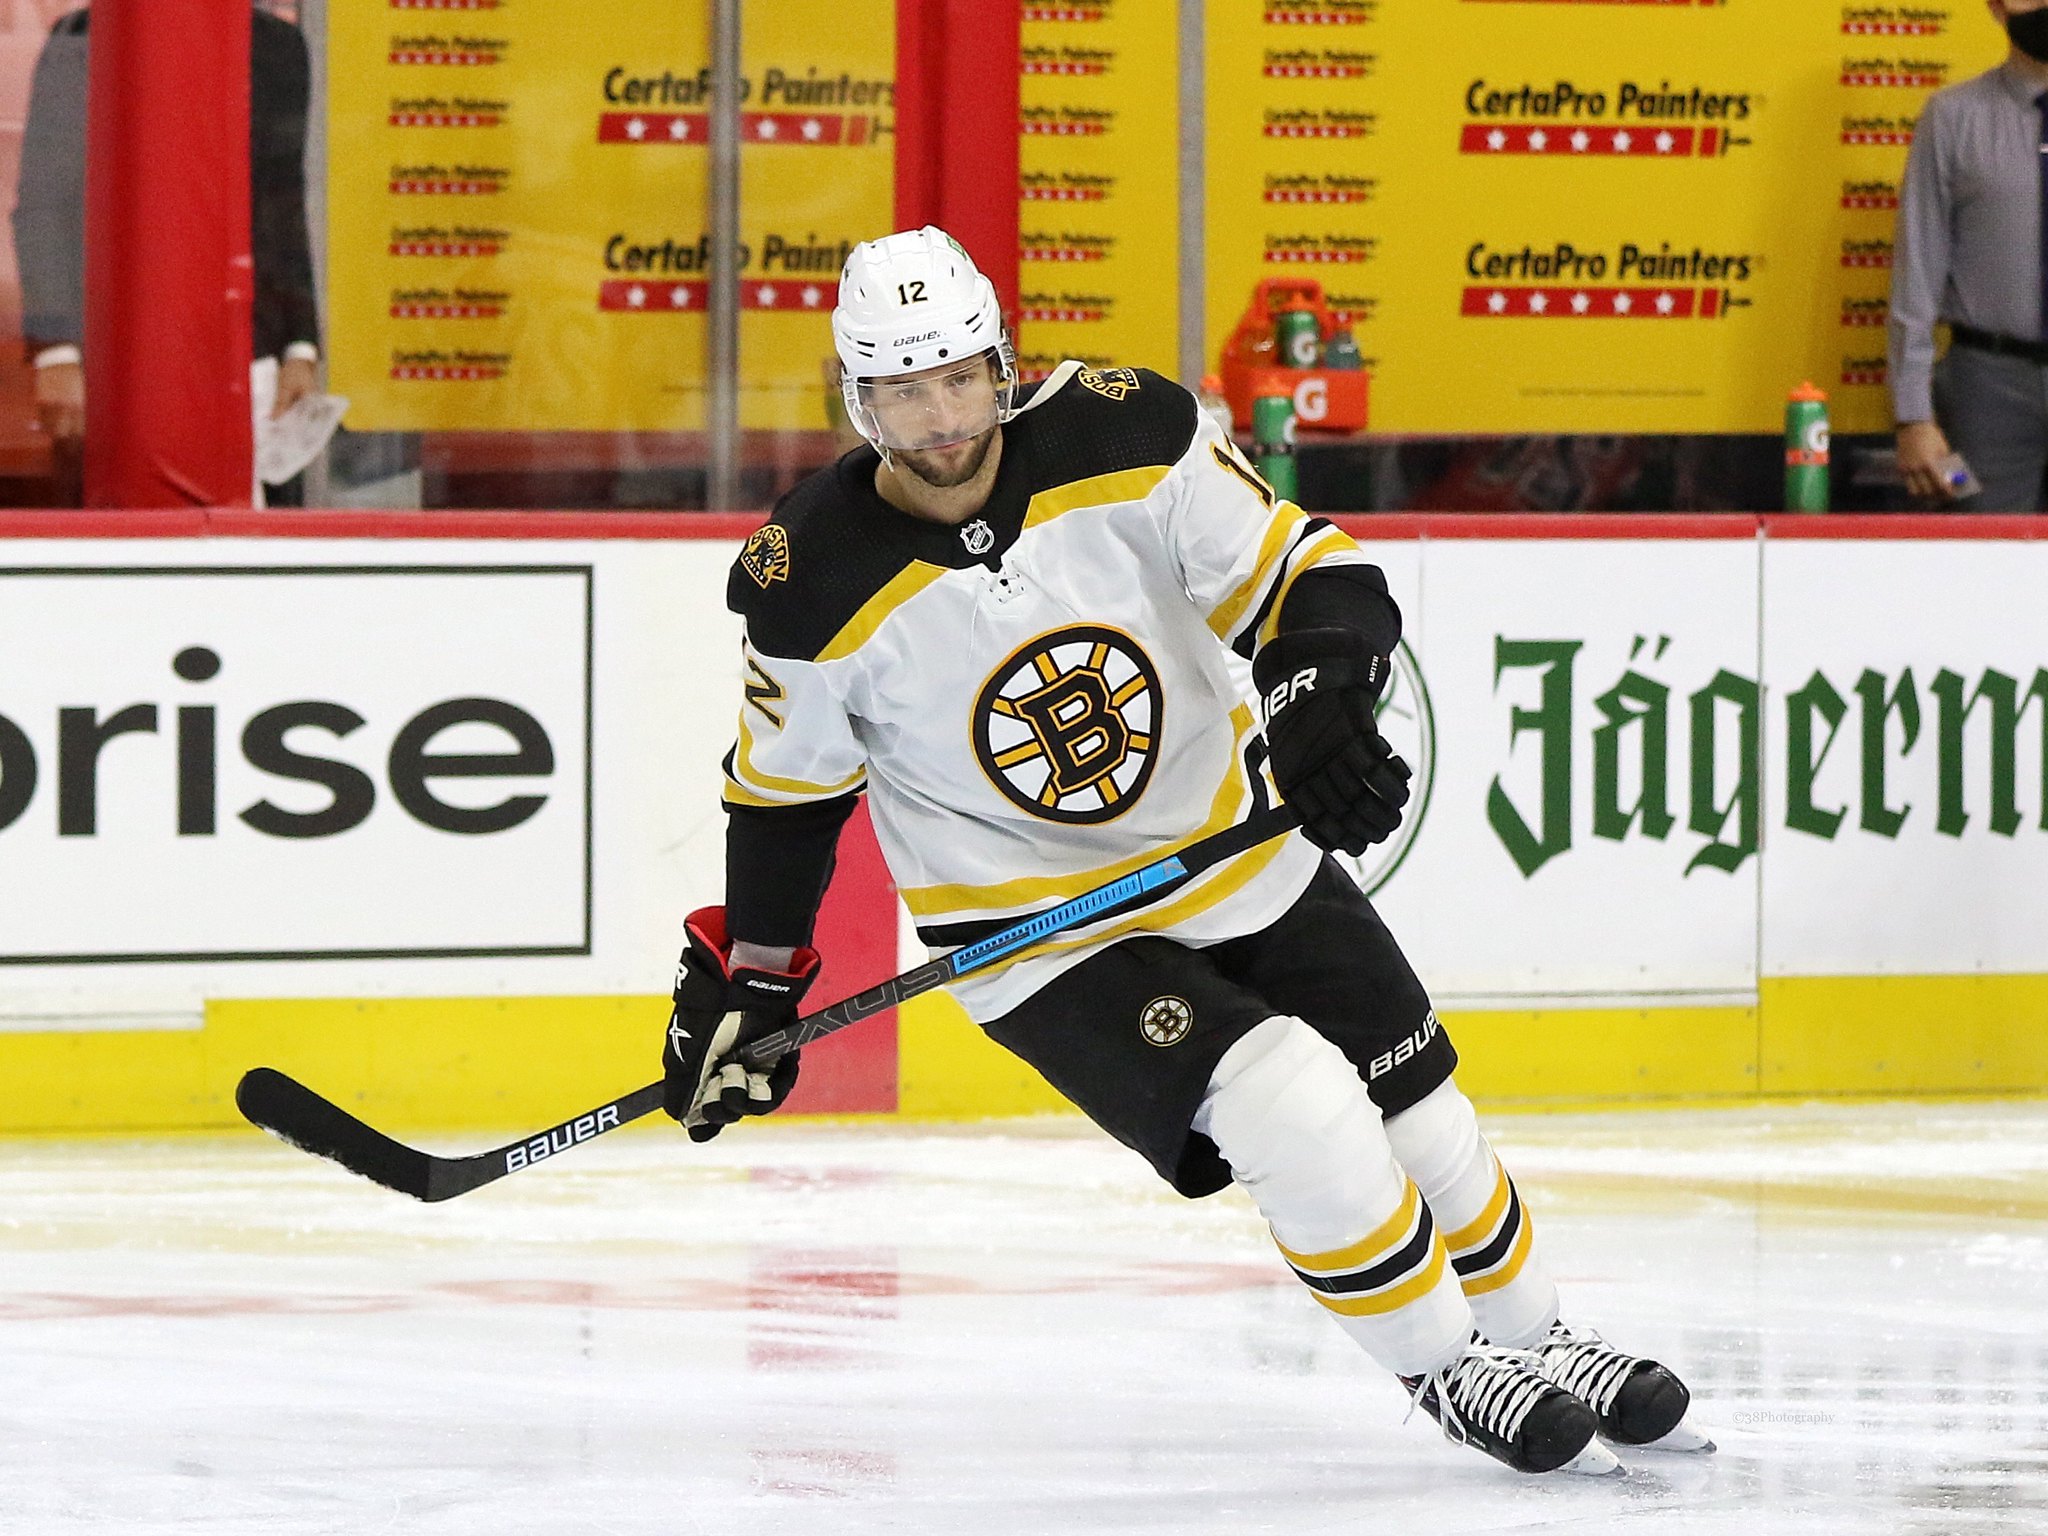 Craig Smith has rediscovered his offensive touch for Bruins